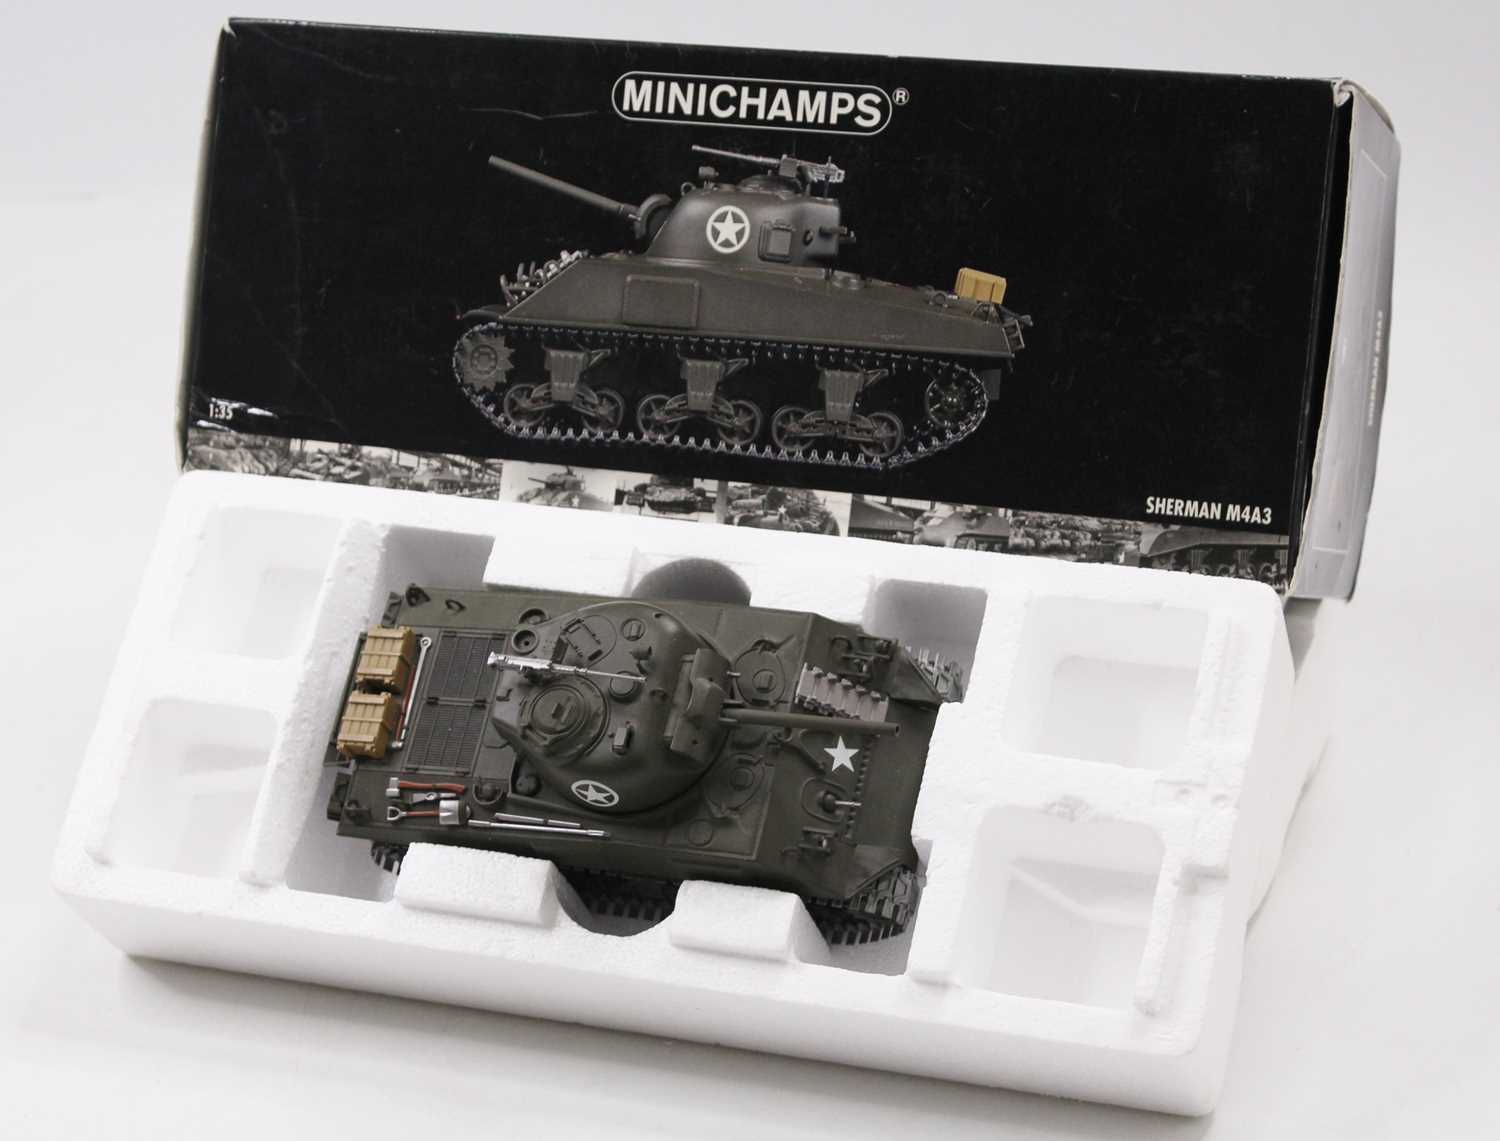 Minichamps model No. 350040000 1/35 scale model of a Sherman M4A3 tank housed in the original